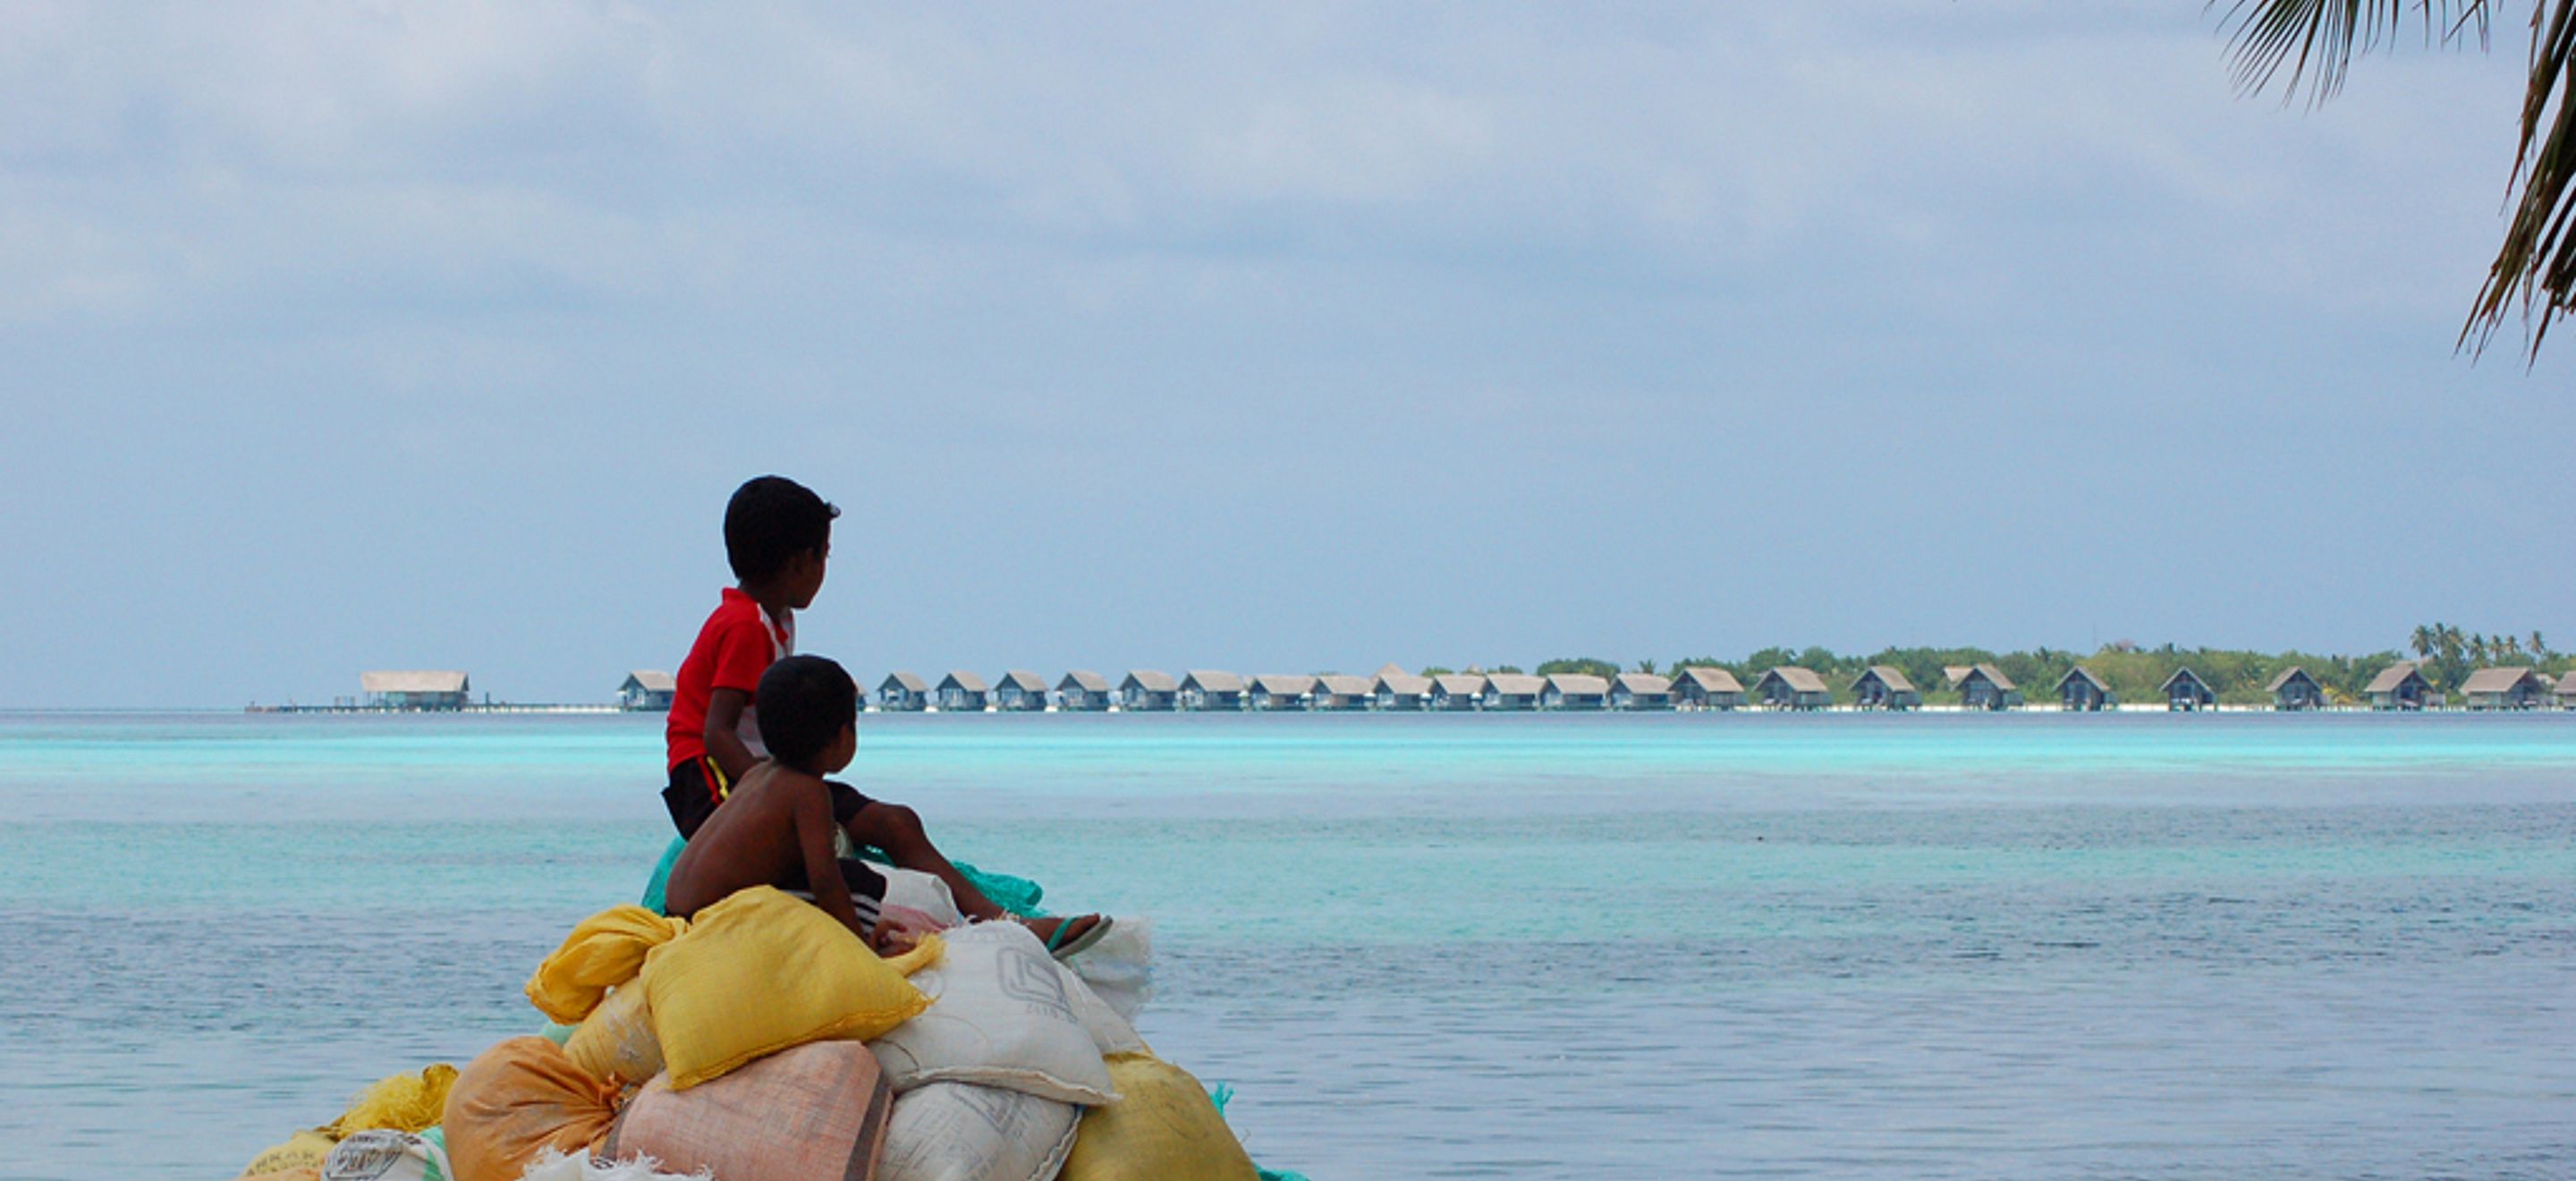 Two children sitting on bags look across the sea to an adjacent island.